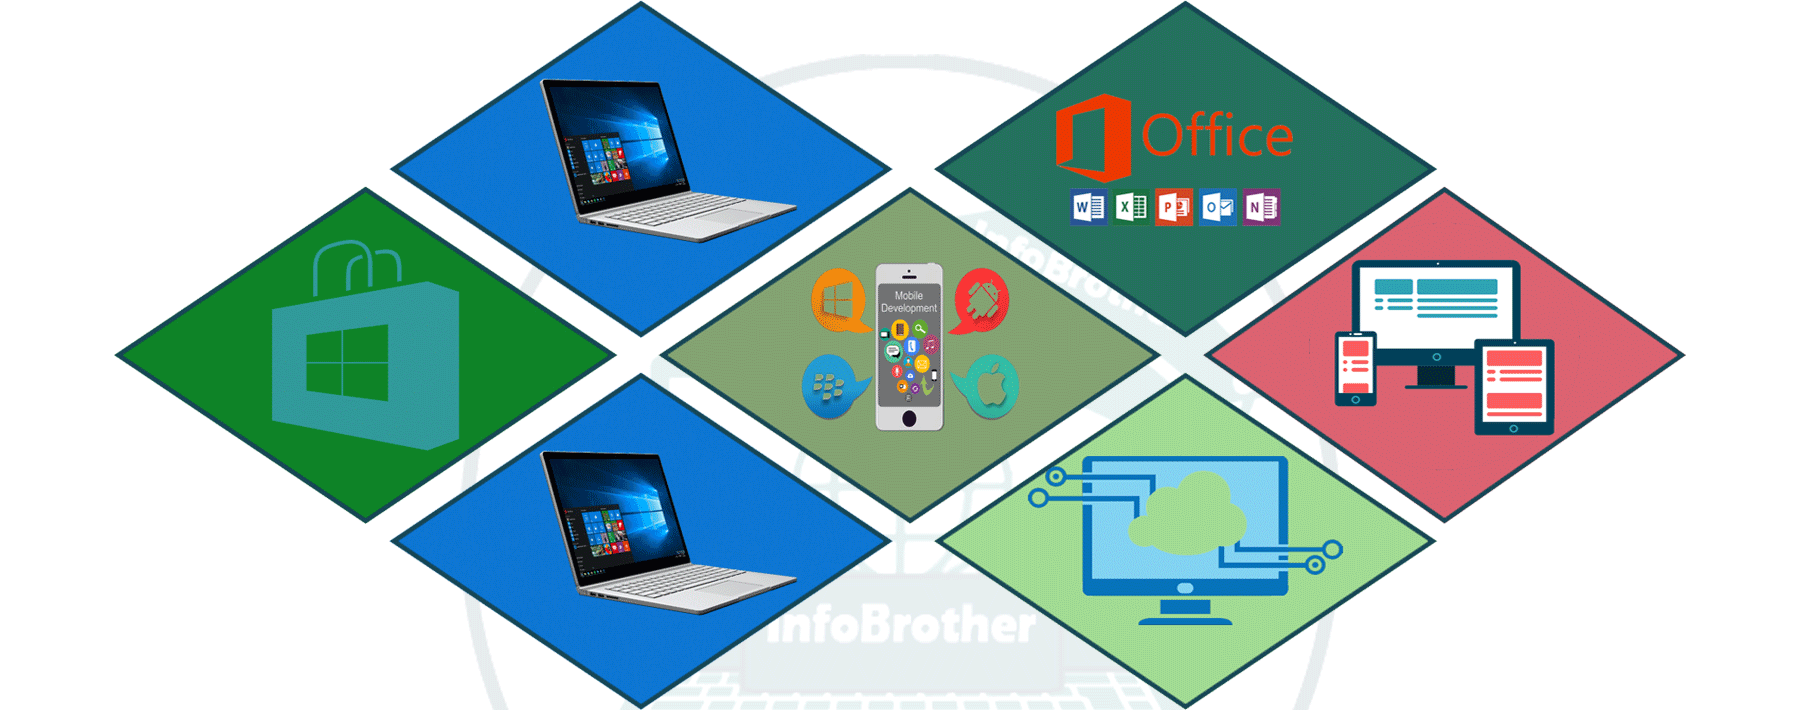 Csharp Overview : infobrother